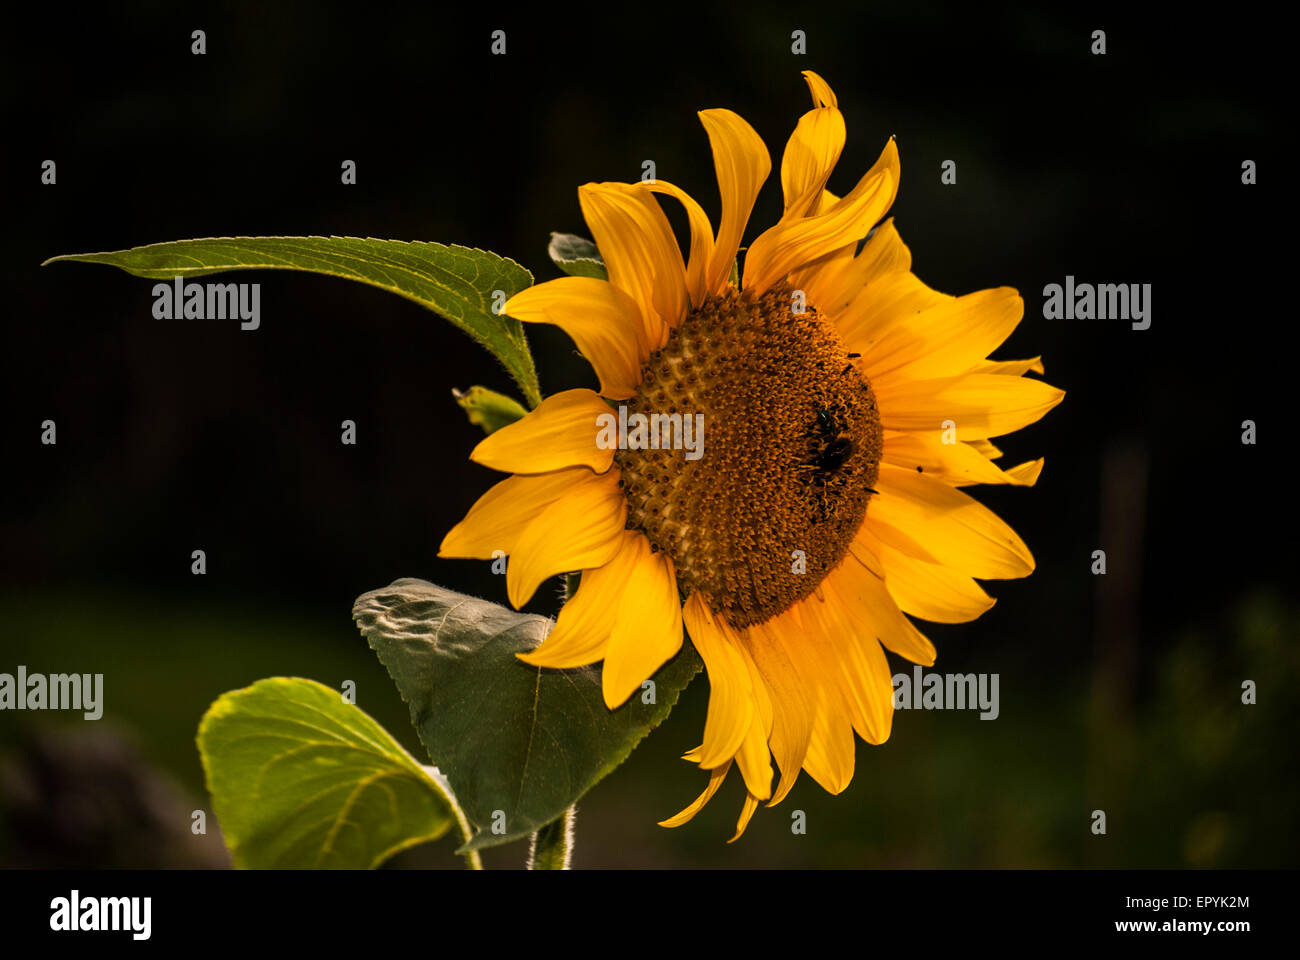 Sunflower with a black background Stock Photo